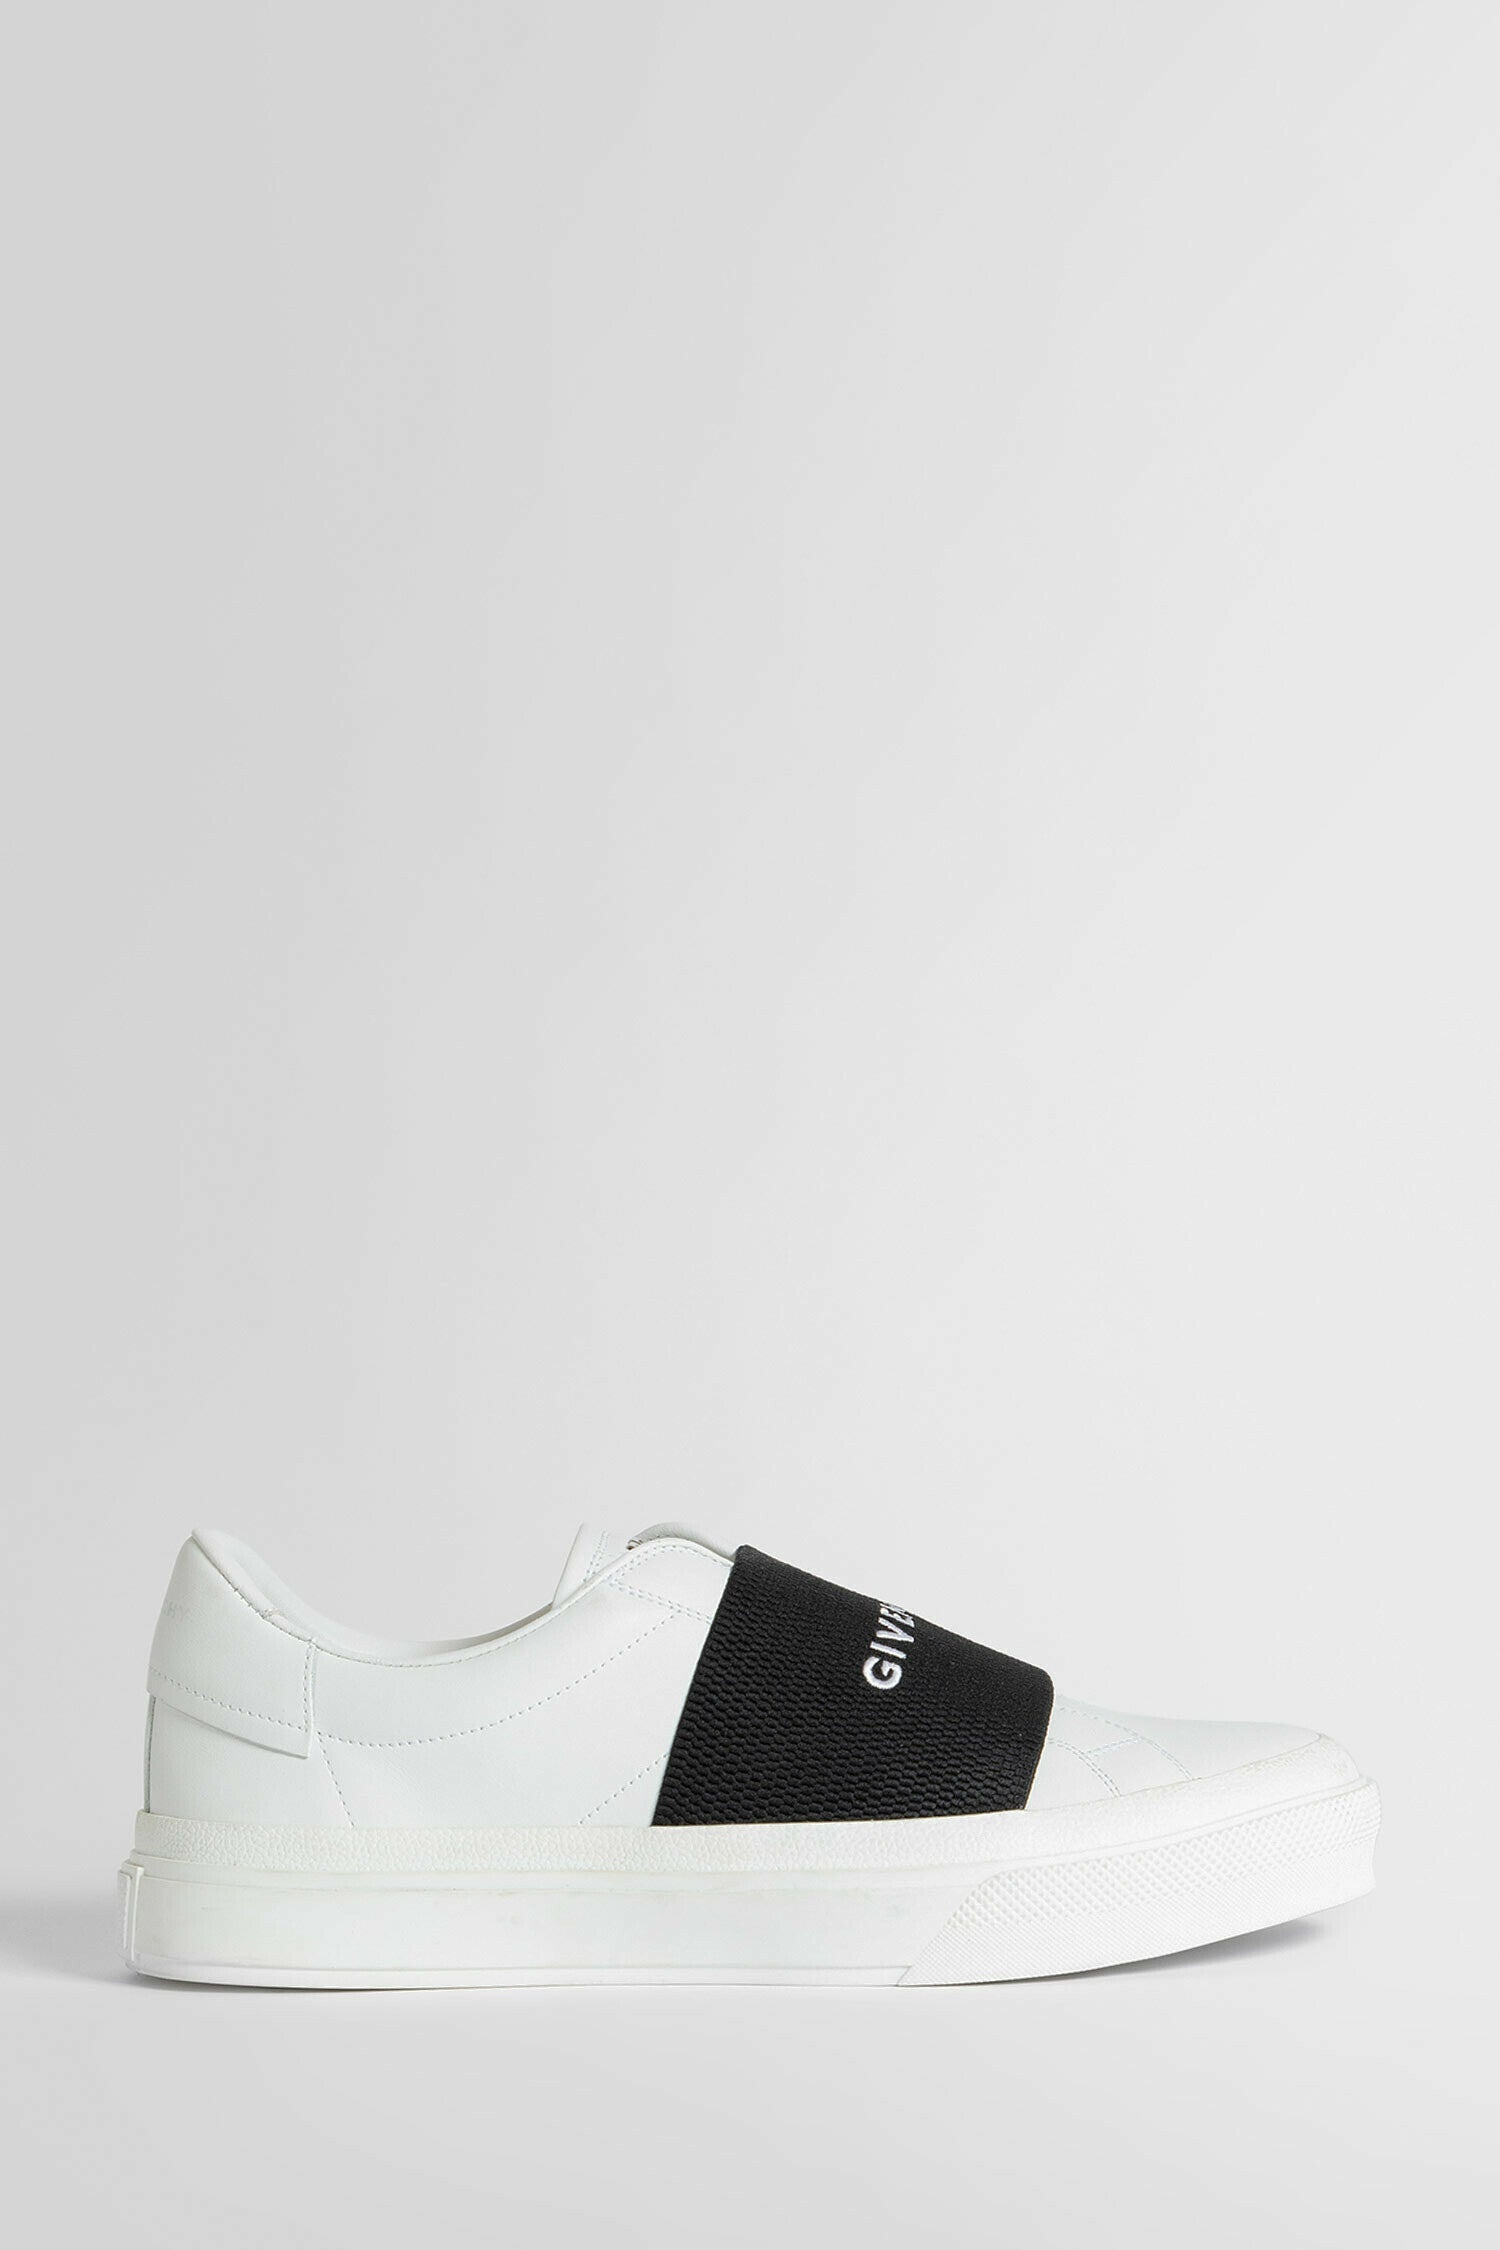 GIVENCHY MAN WHITE SNEAKERS - 1